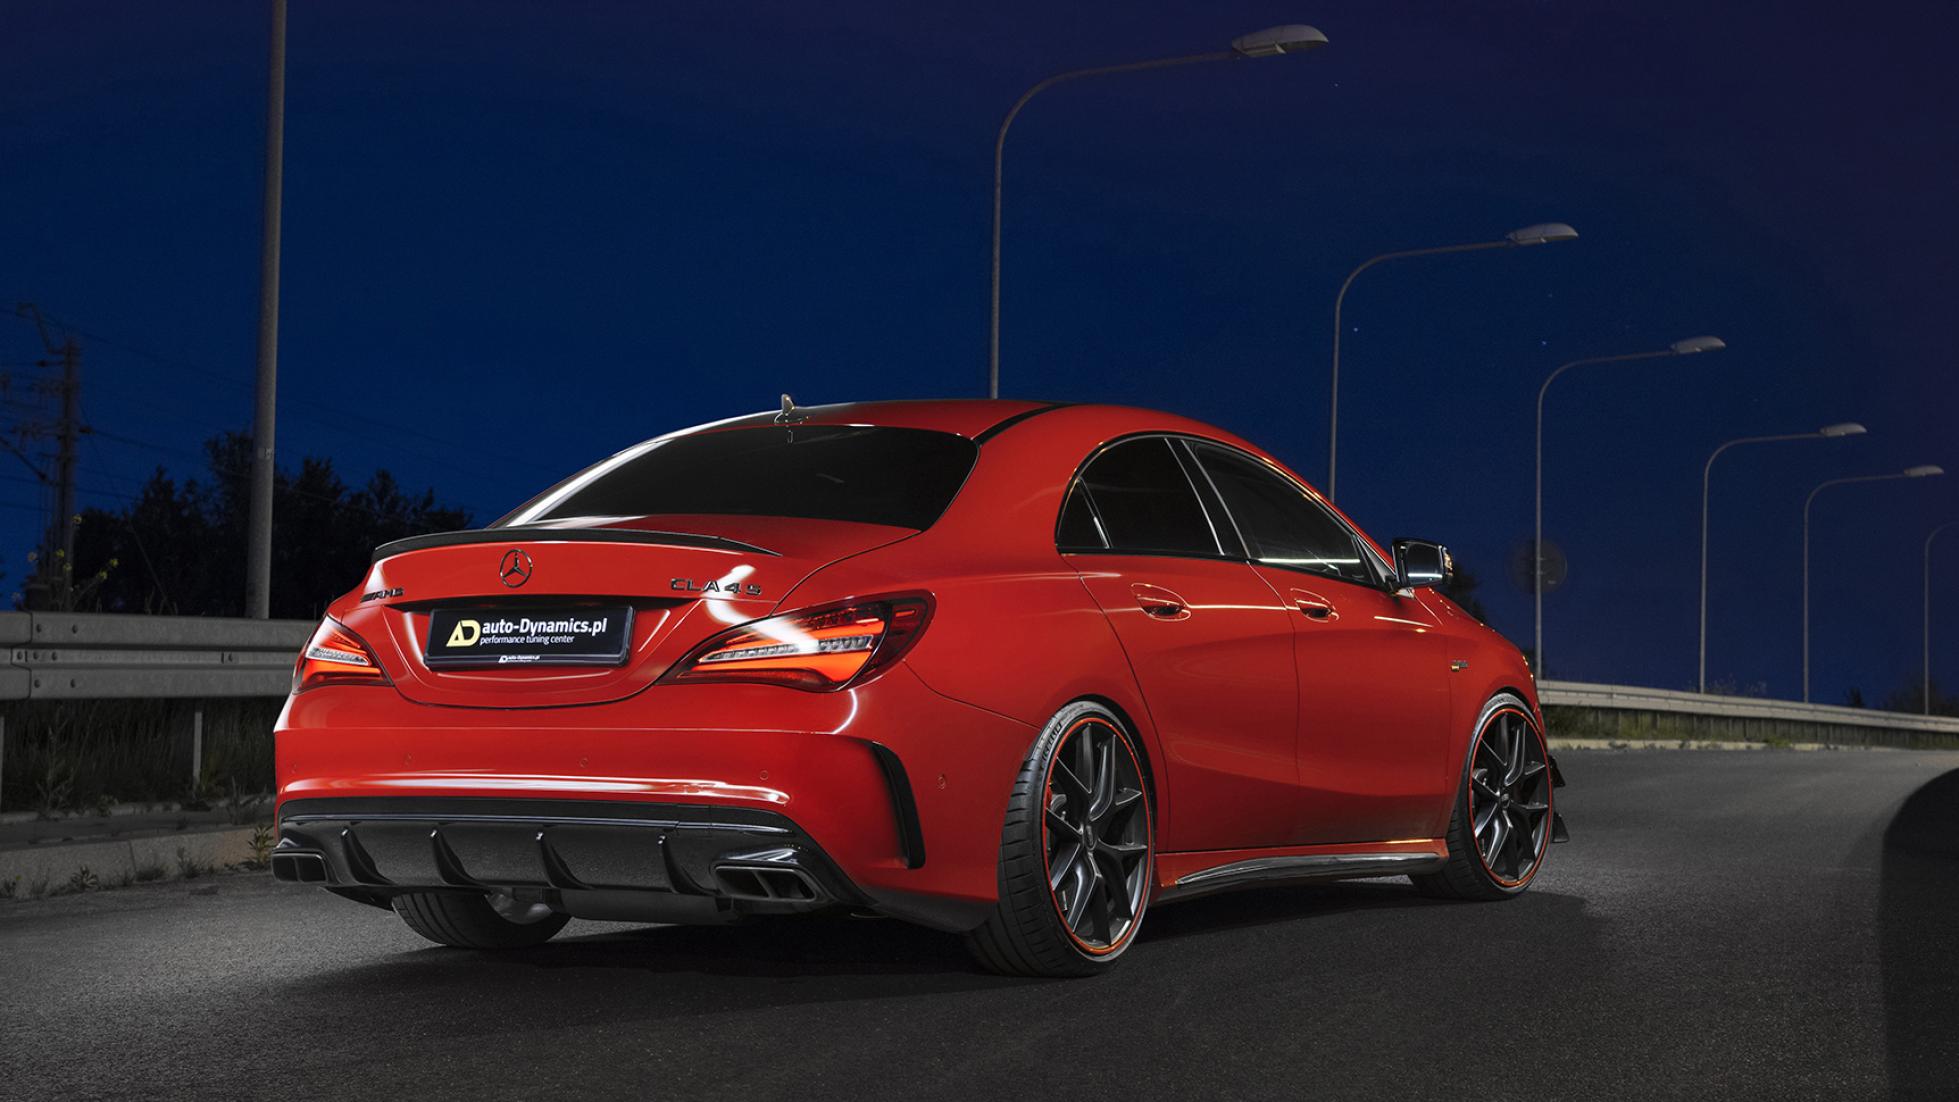 MercedesAMG CLA45 Gets New Look and Tuned to Reach 535 HP